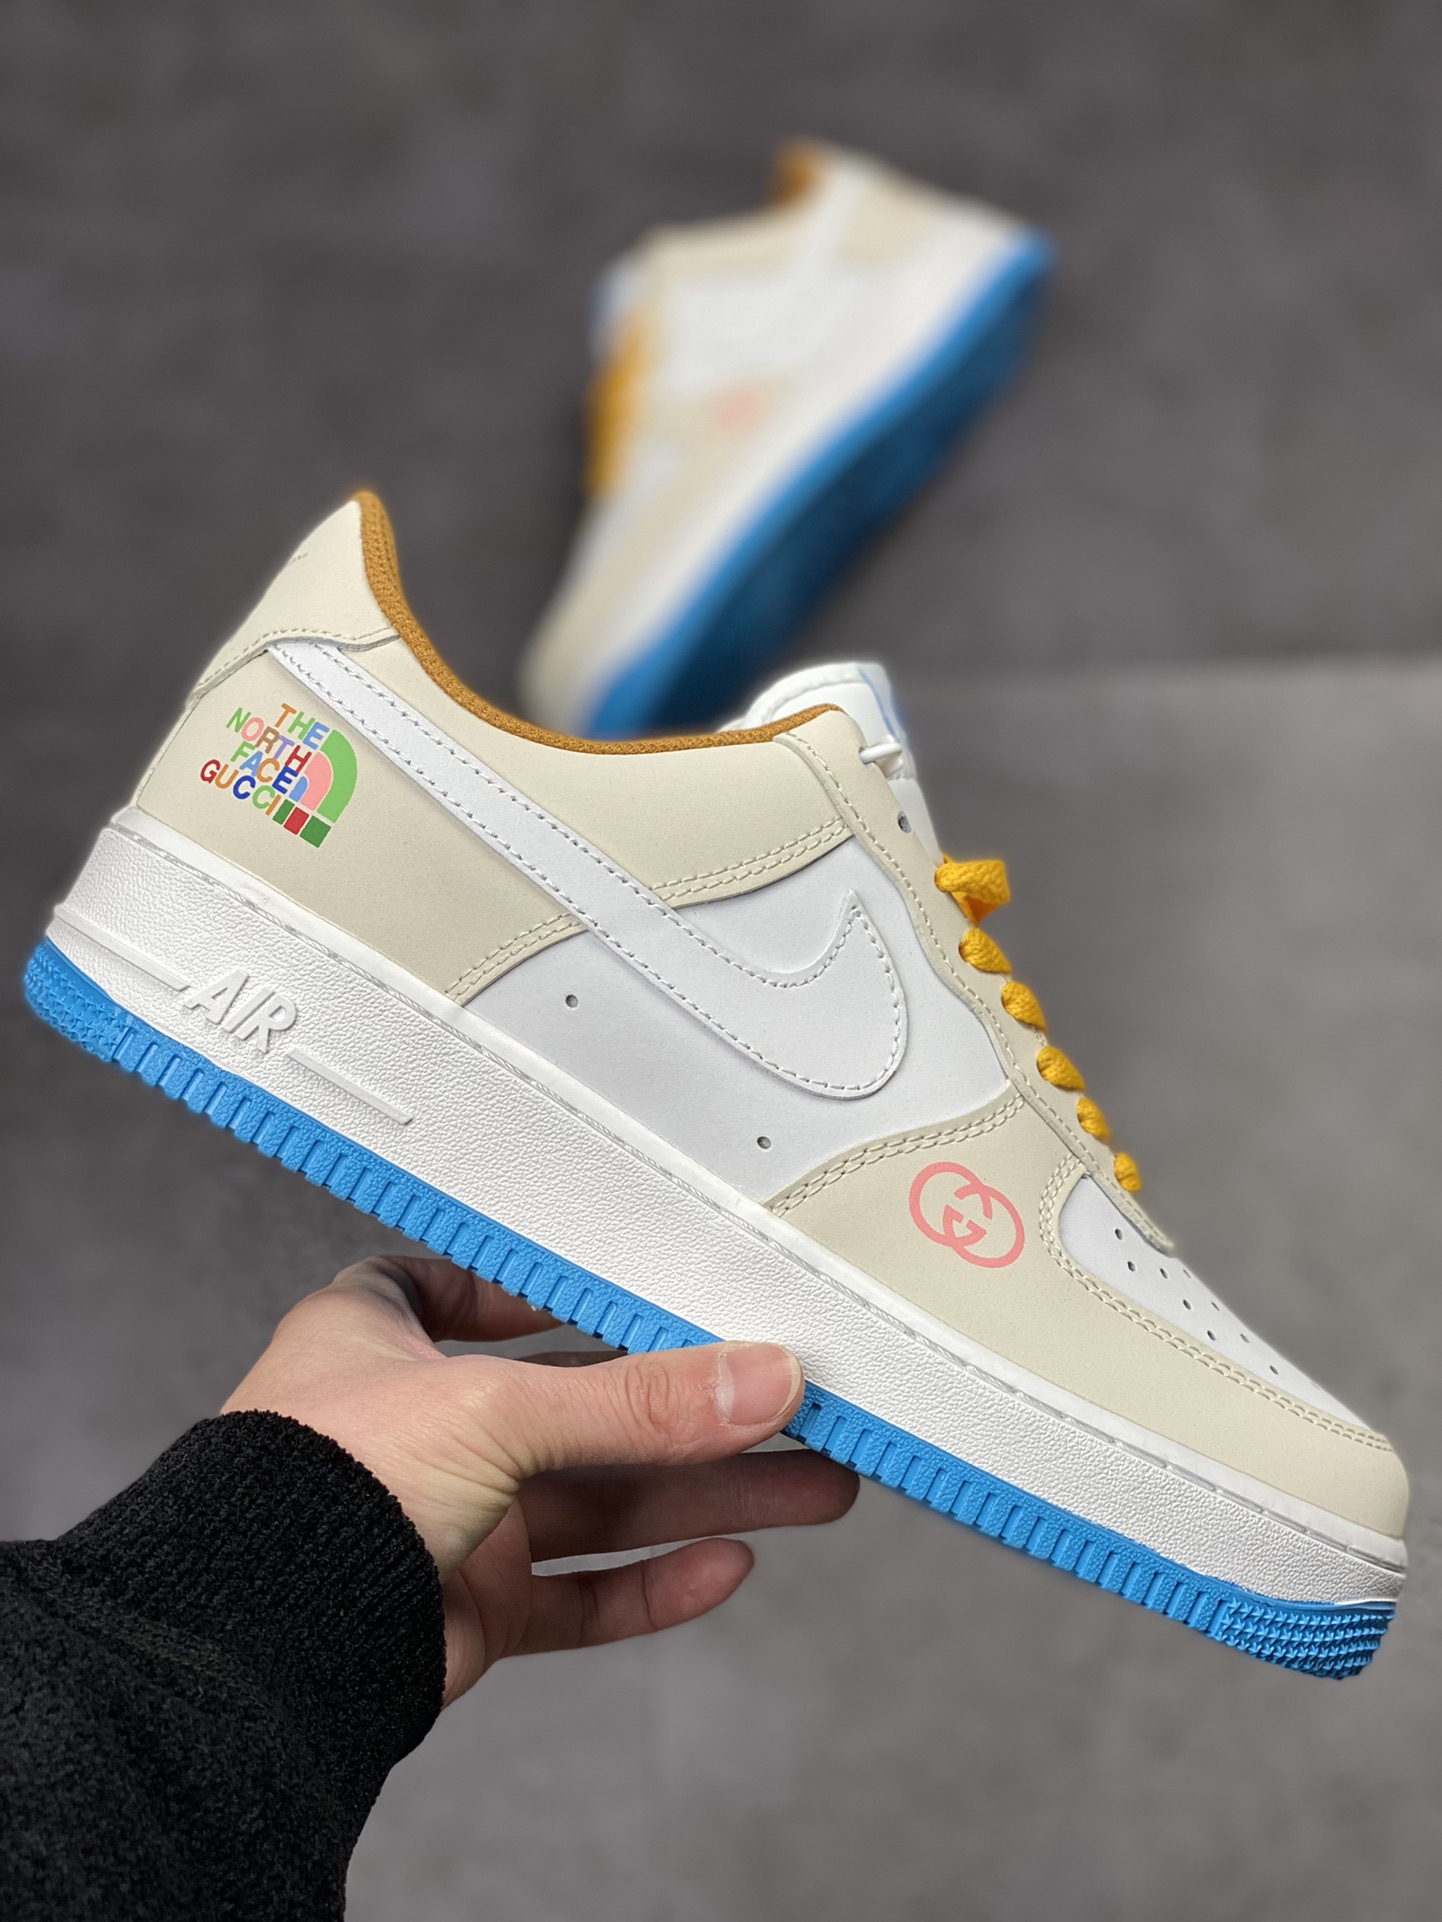 Nike Air Force 1 Low 07 x The North Face x Gucci Beige White Color 315122-011